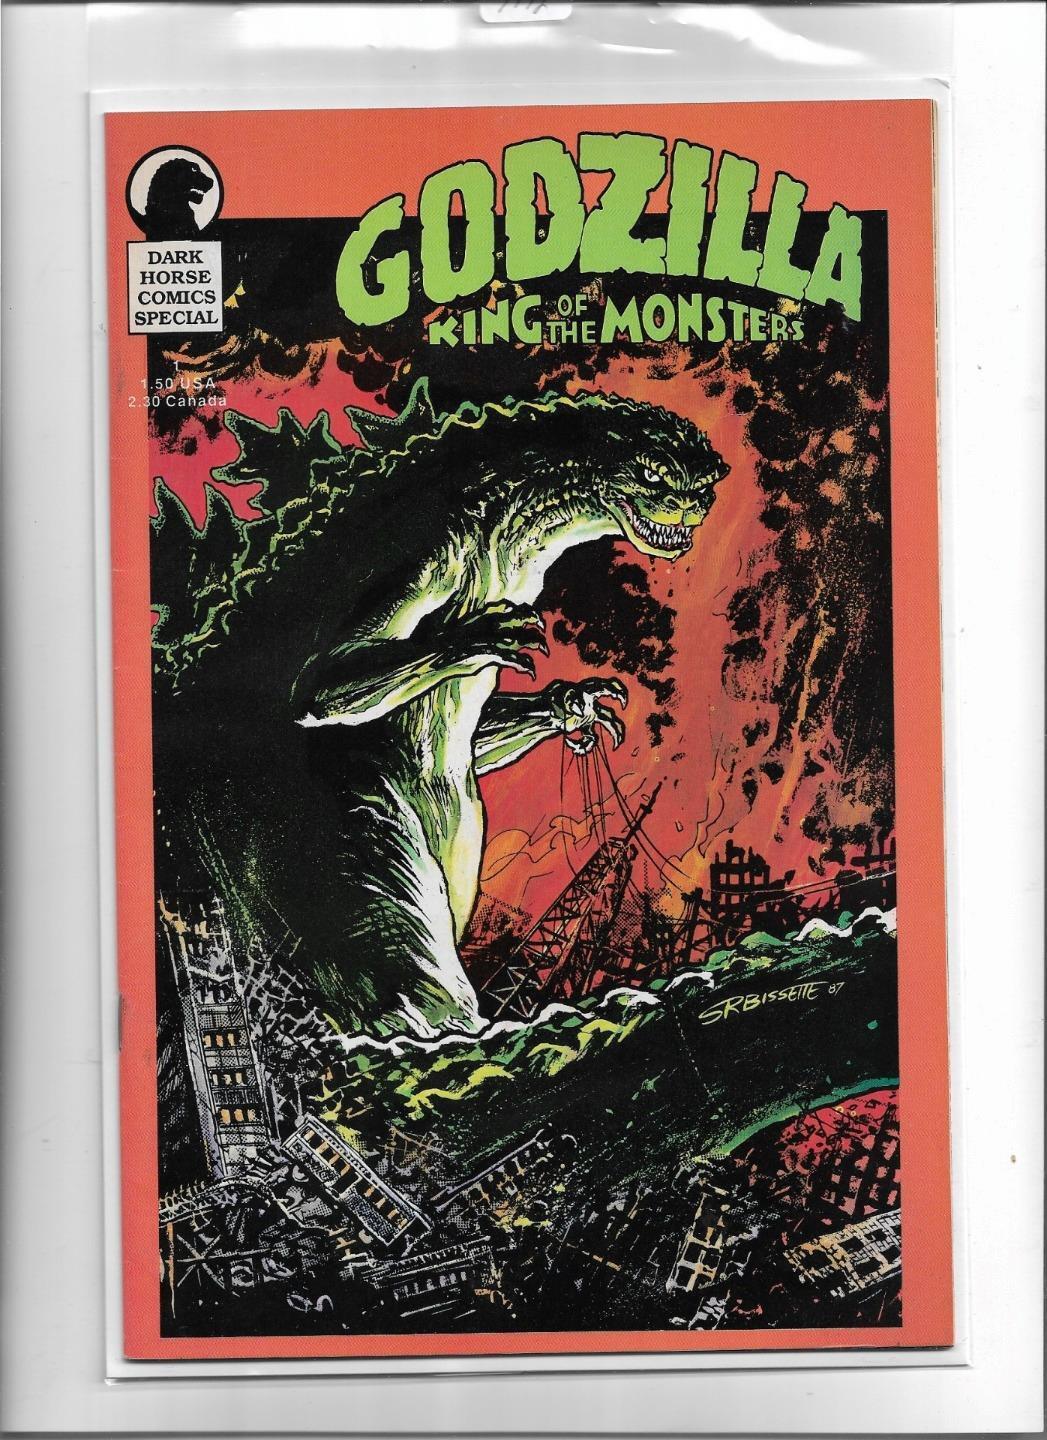 GODZILLA, KING OF THE MONSTERS #1 1987 VERY FINE 8.0 5332